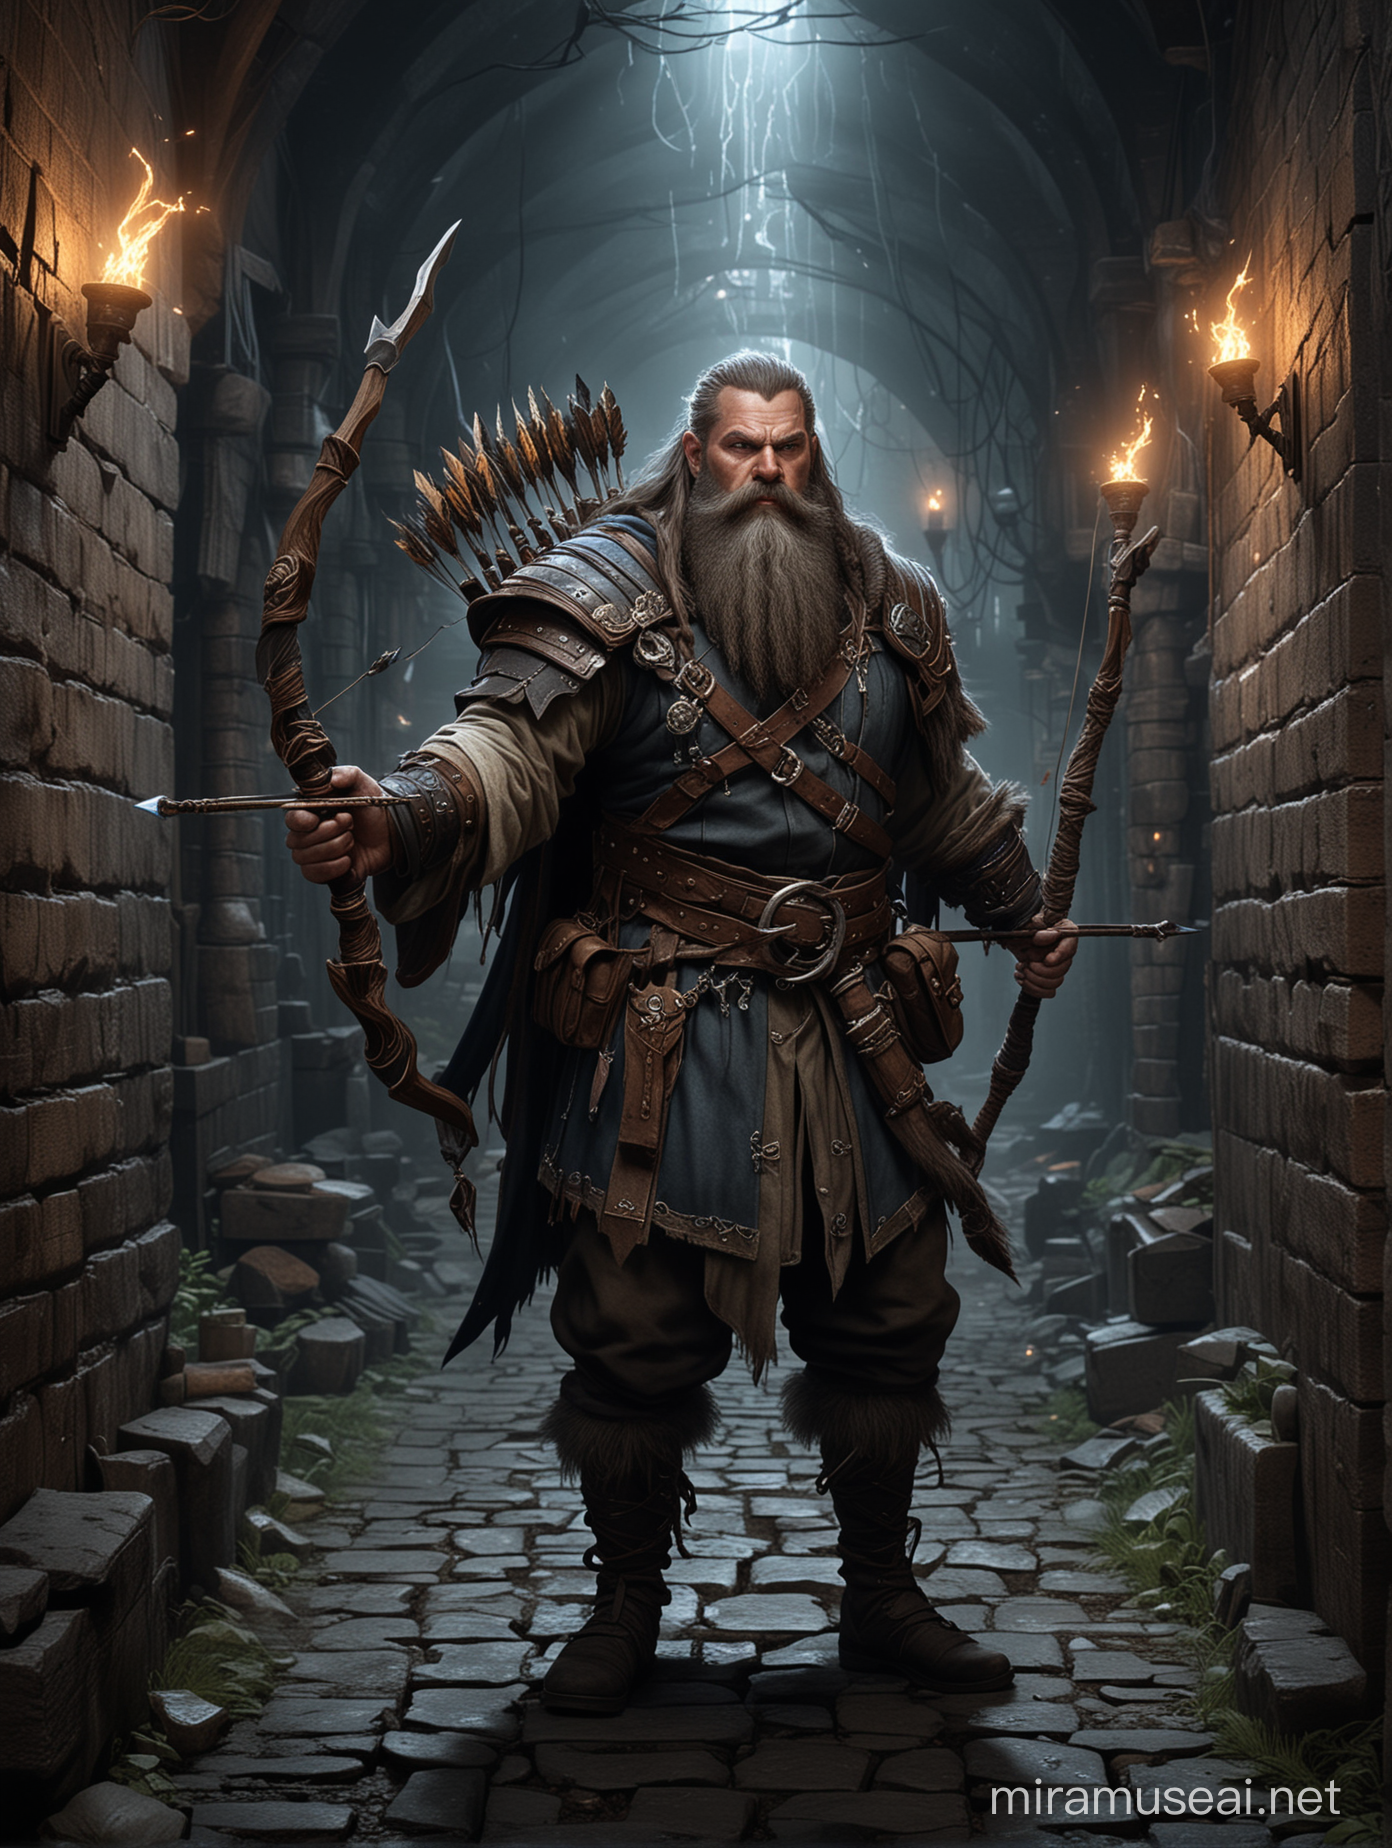 The character is a male dwarf arcane archer. He has a long beard and is surrounded by a strong aura of magic. Several bows and glowing arrows are levitating around him. He's in a dark alley fighting with assassins.